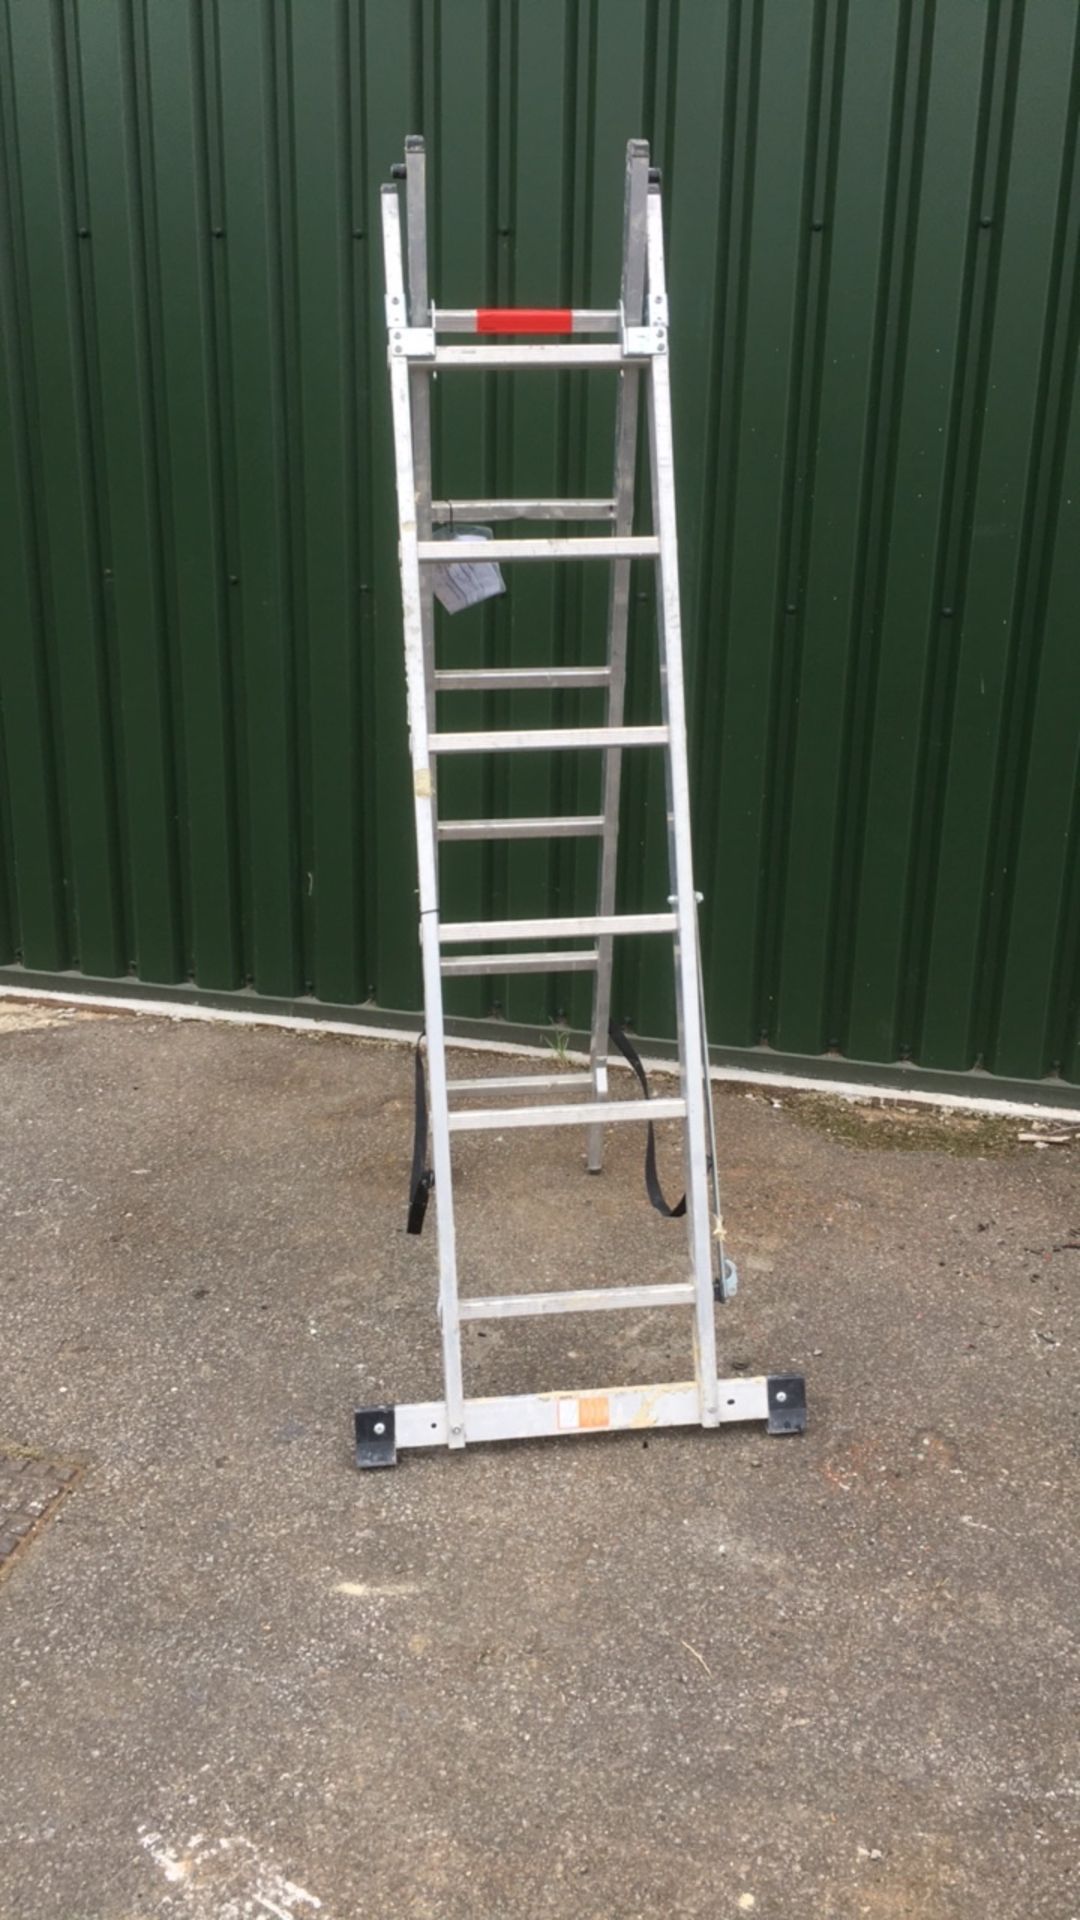 Youngman 3 way combo ladder (A950837) - Image 2 of 5